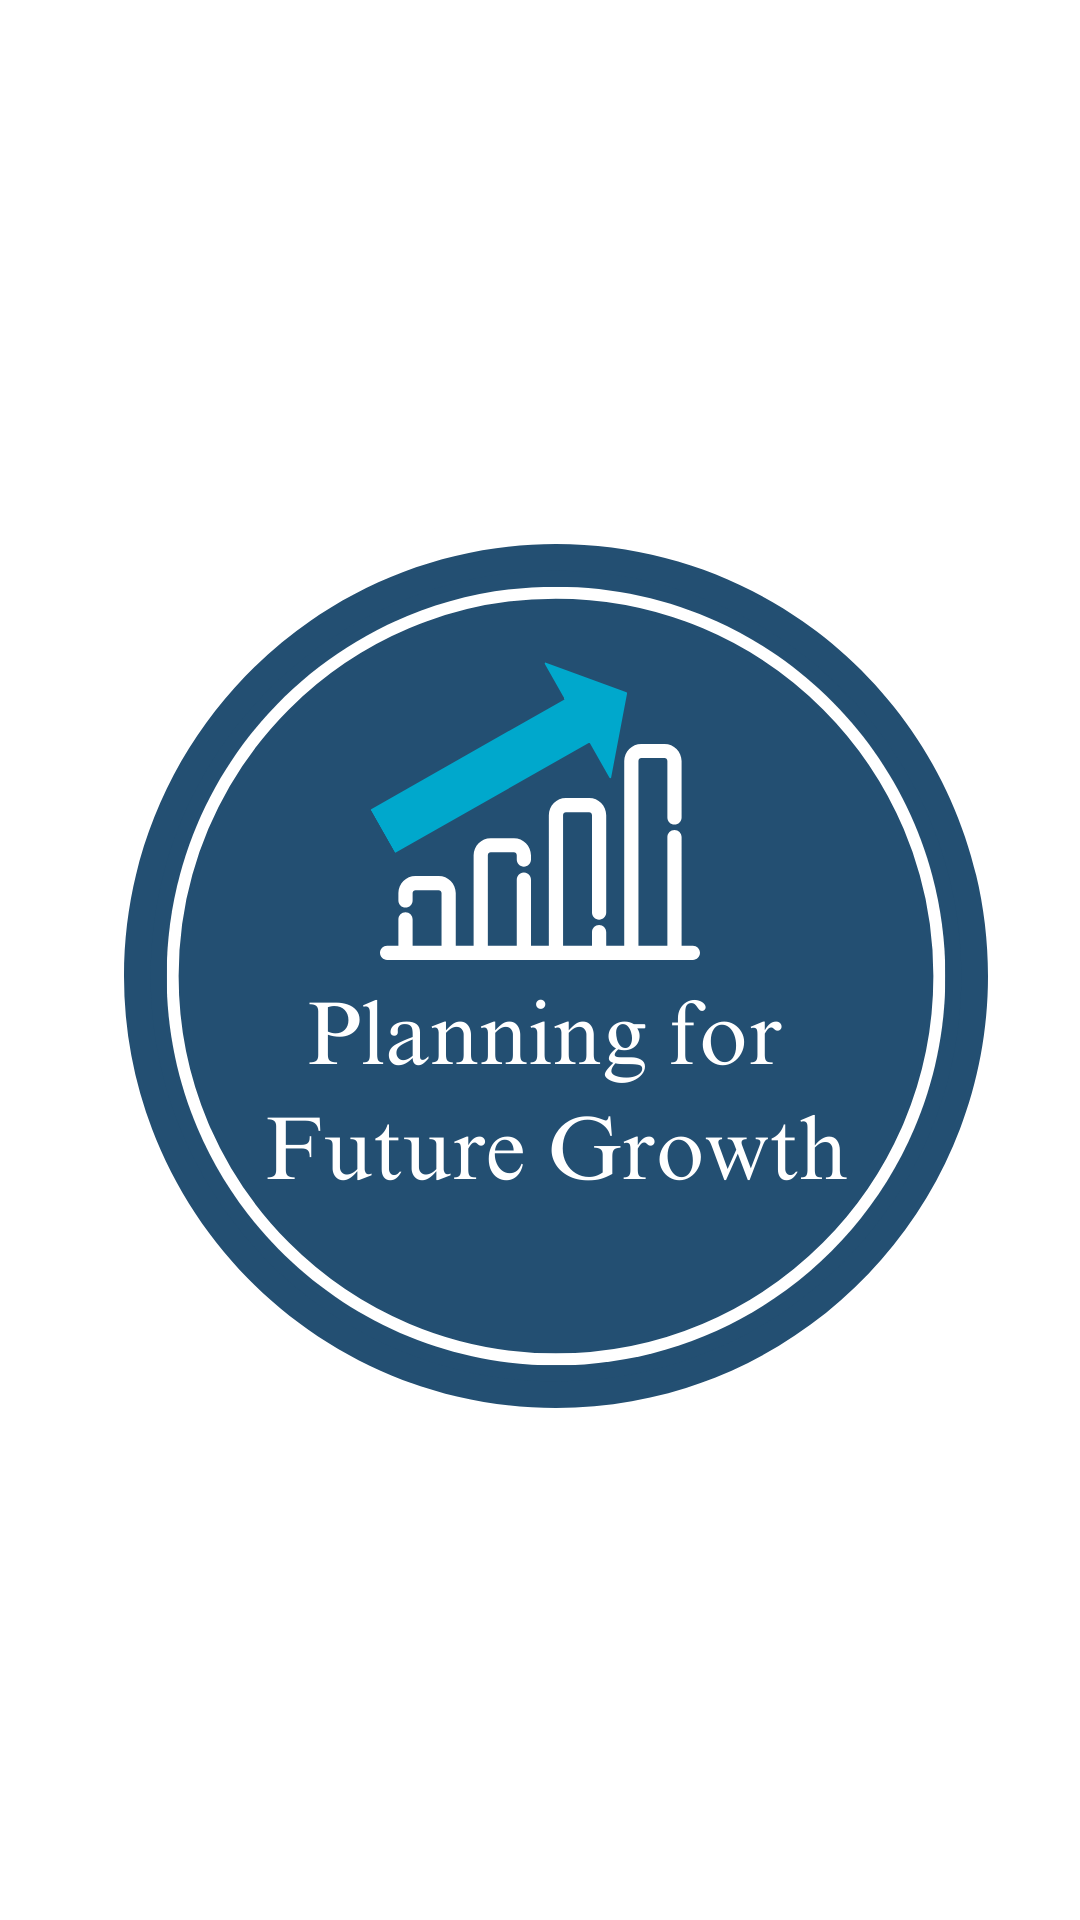 Planning for Future Growth